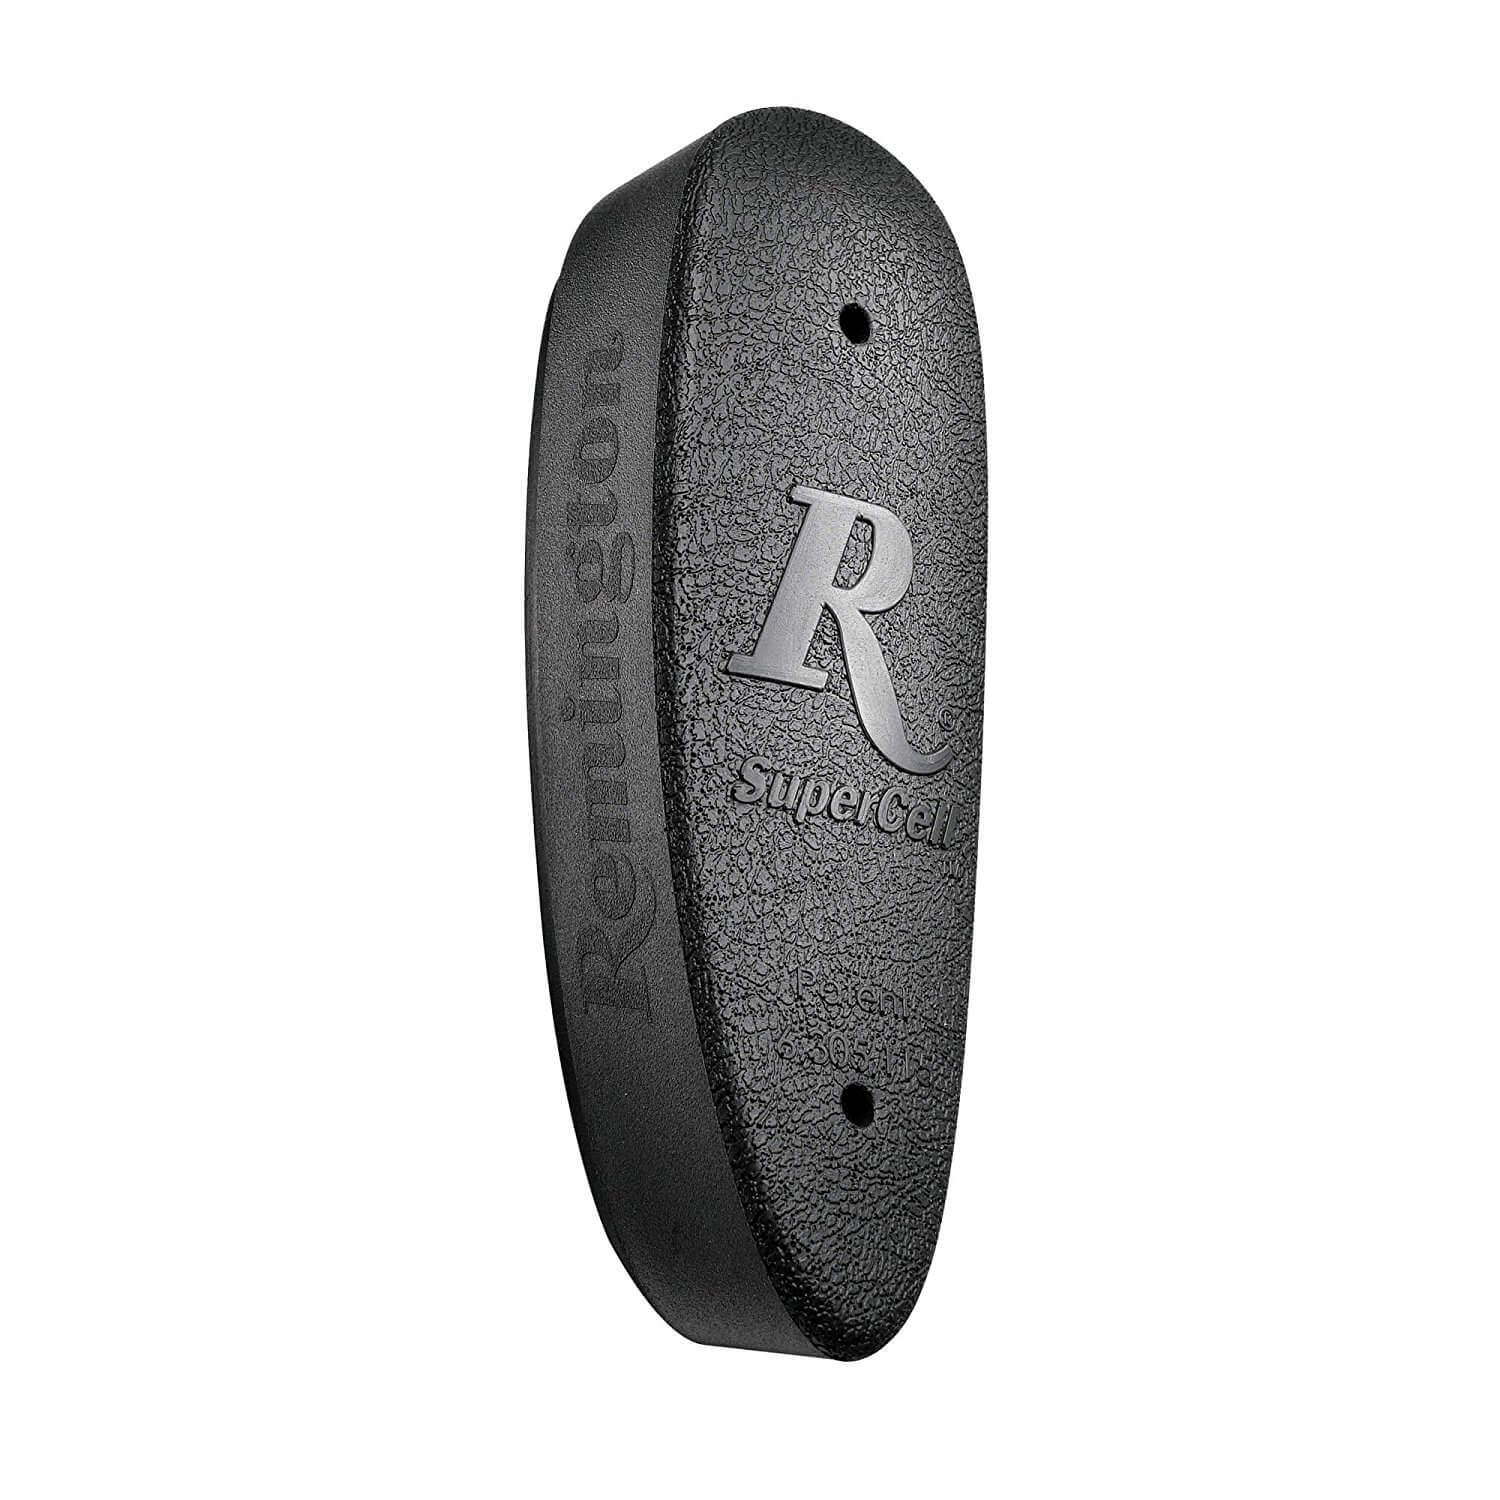 Remington SuperCell Recoil Pad with Wood Stock Black 1947